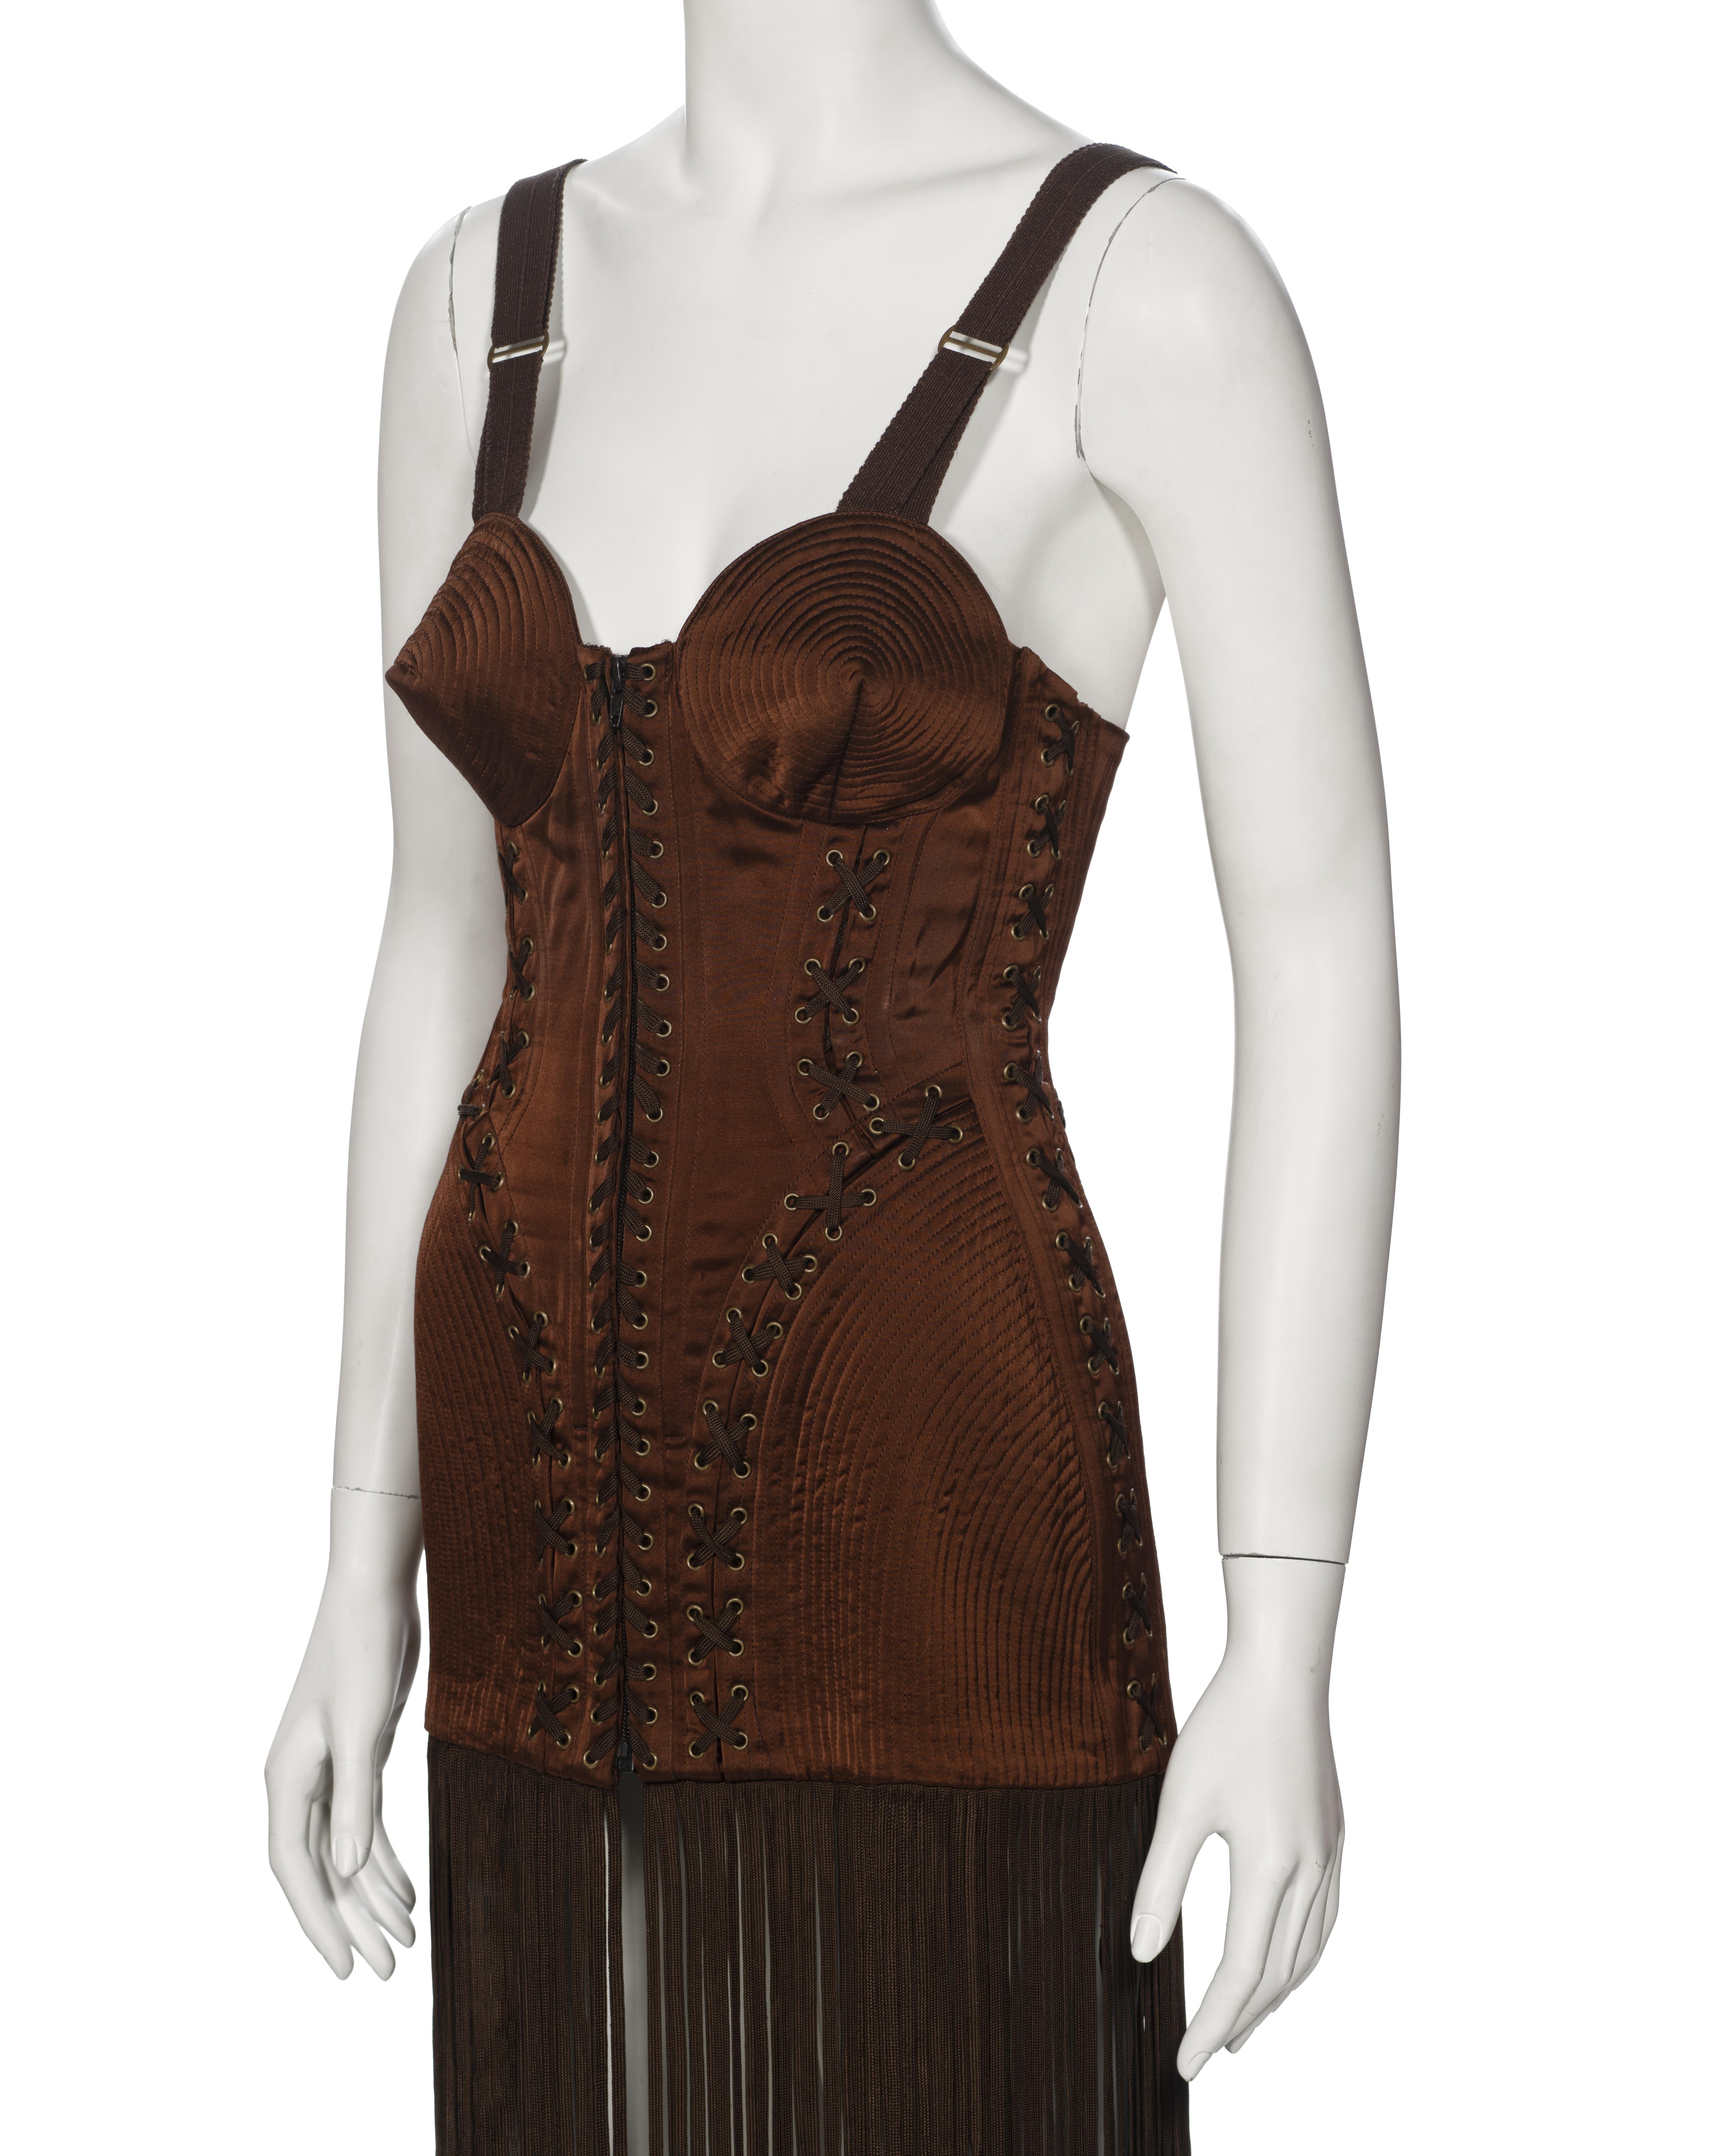 Jean Paul Gaultier Brown Corset Dress with Cone Bra and Fringed Hem, fw 1990 For Sale 14